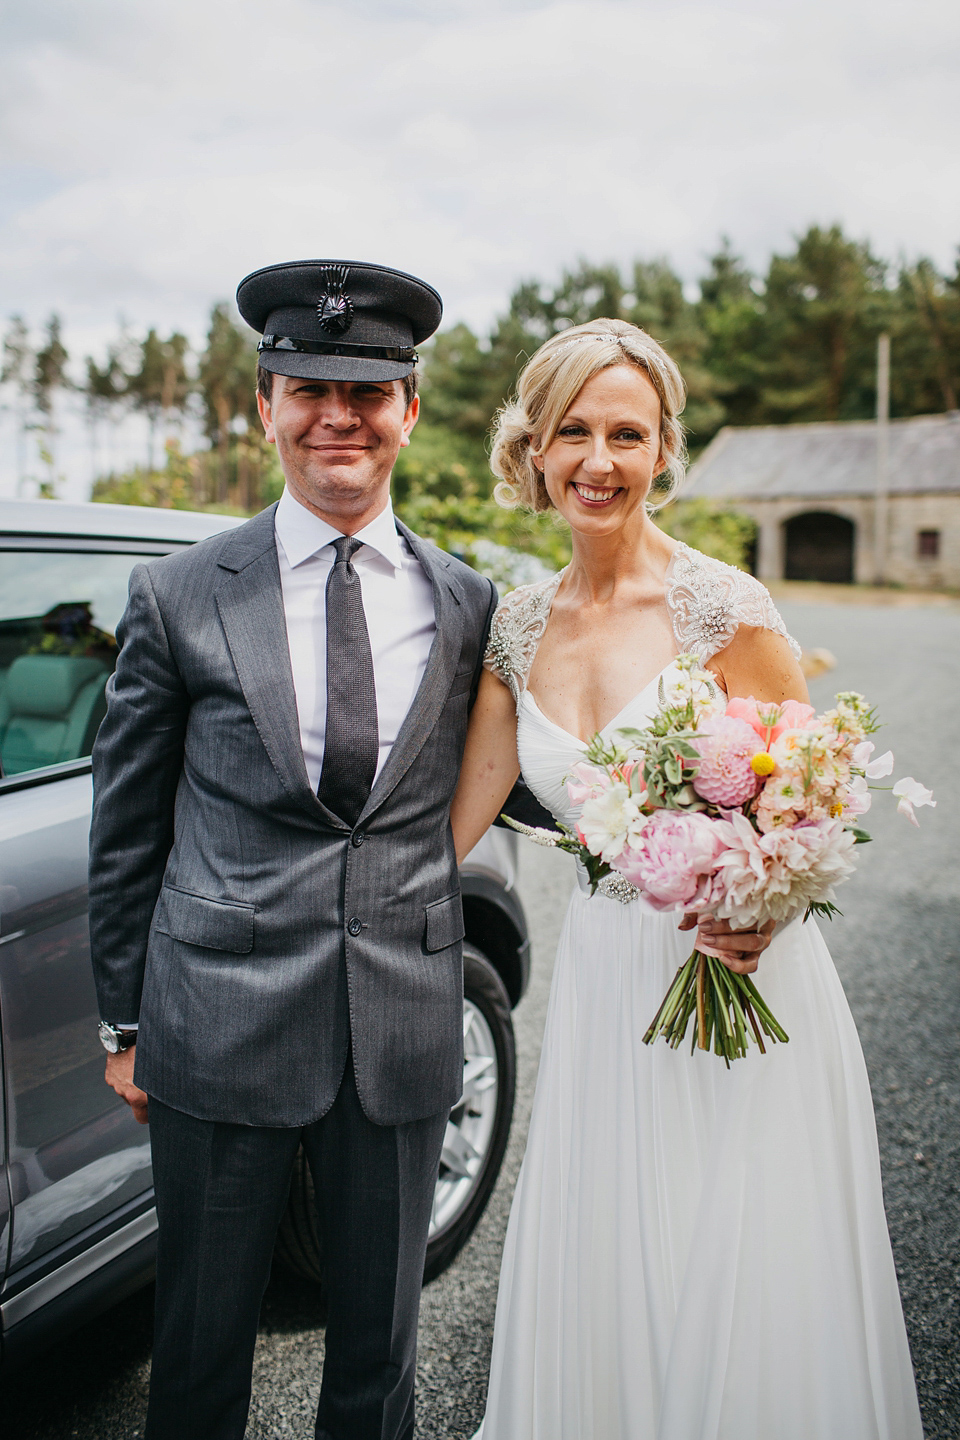 A Suzanne Neville gown and shades fo pink for a colourful wedding at Healey Barn, Northumberland. Photography by John Hope.